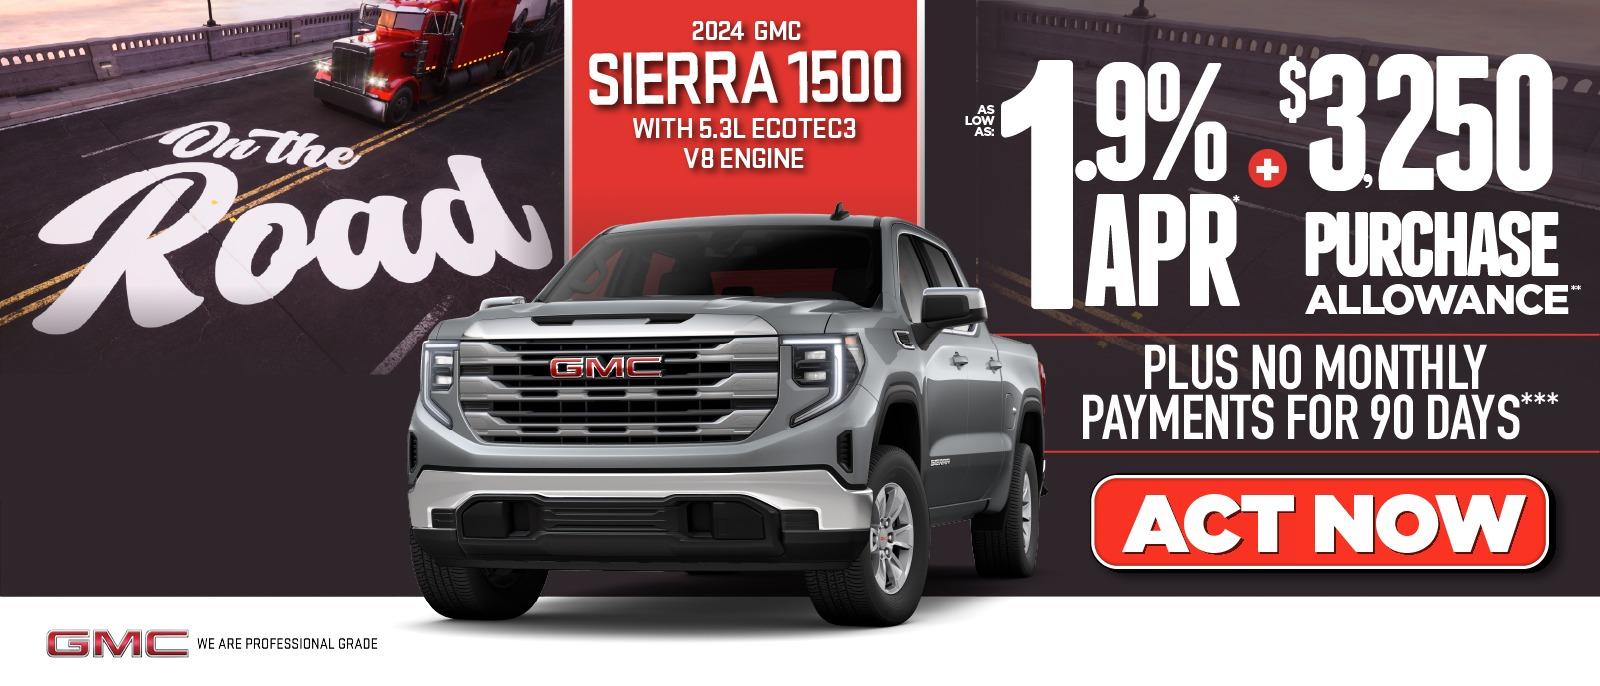 2024 Sierra 1500 with 5.3 Ecotec3 V8 Engine - 1.9% APR, plus no monthly payments for 90 days. Act Now.